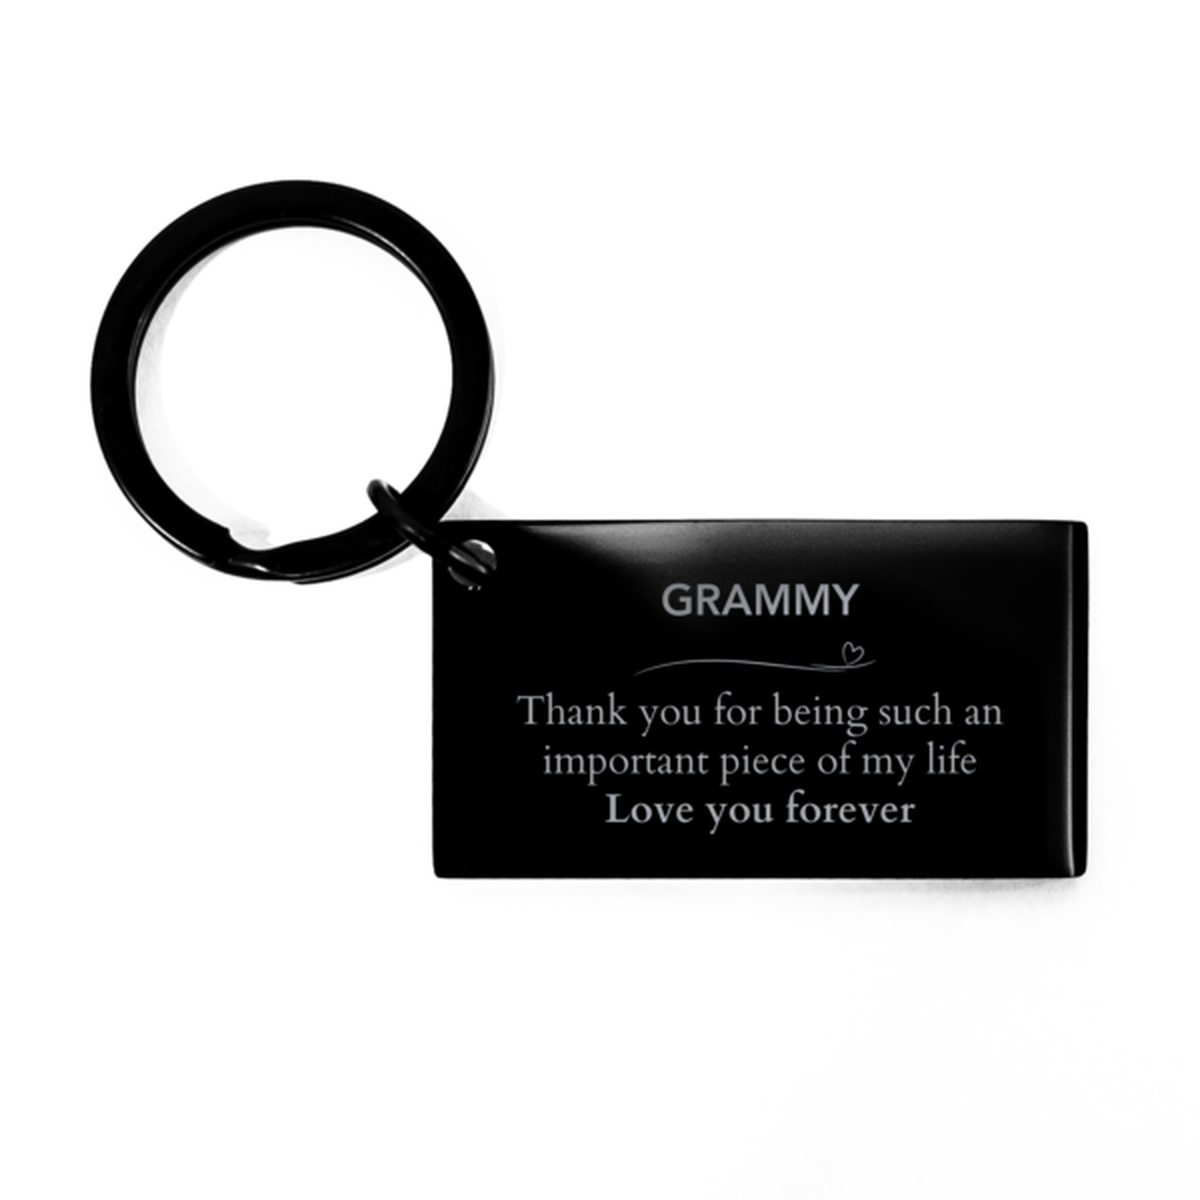 Appropriate Grammy Keychain Epic Birthday Gifts for Grammy Thank you for being such an important piece of my life Grammy Christmas Mothers Fathers Day